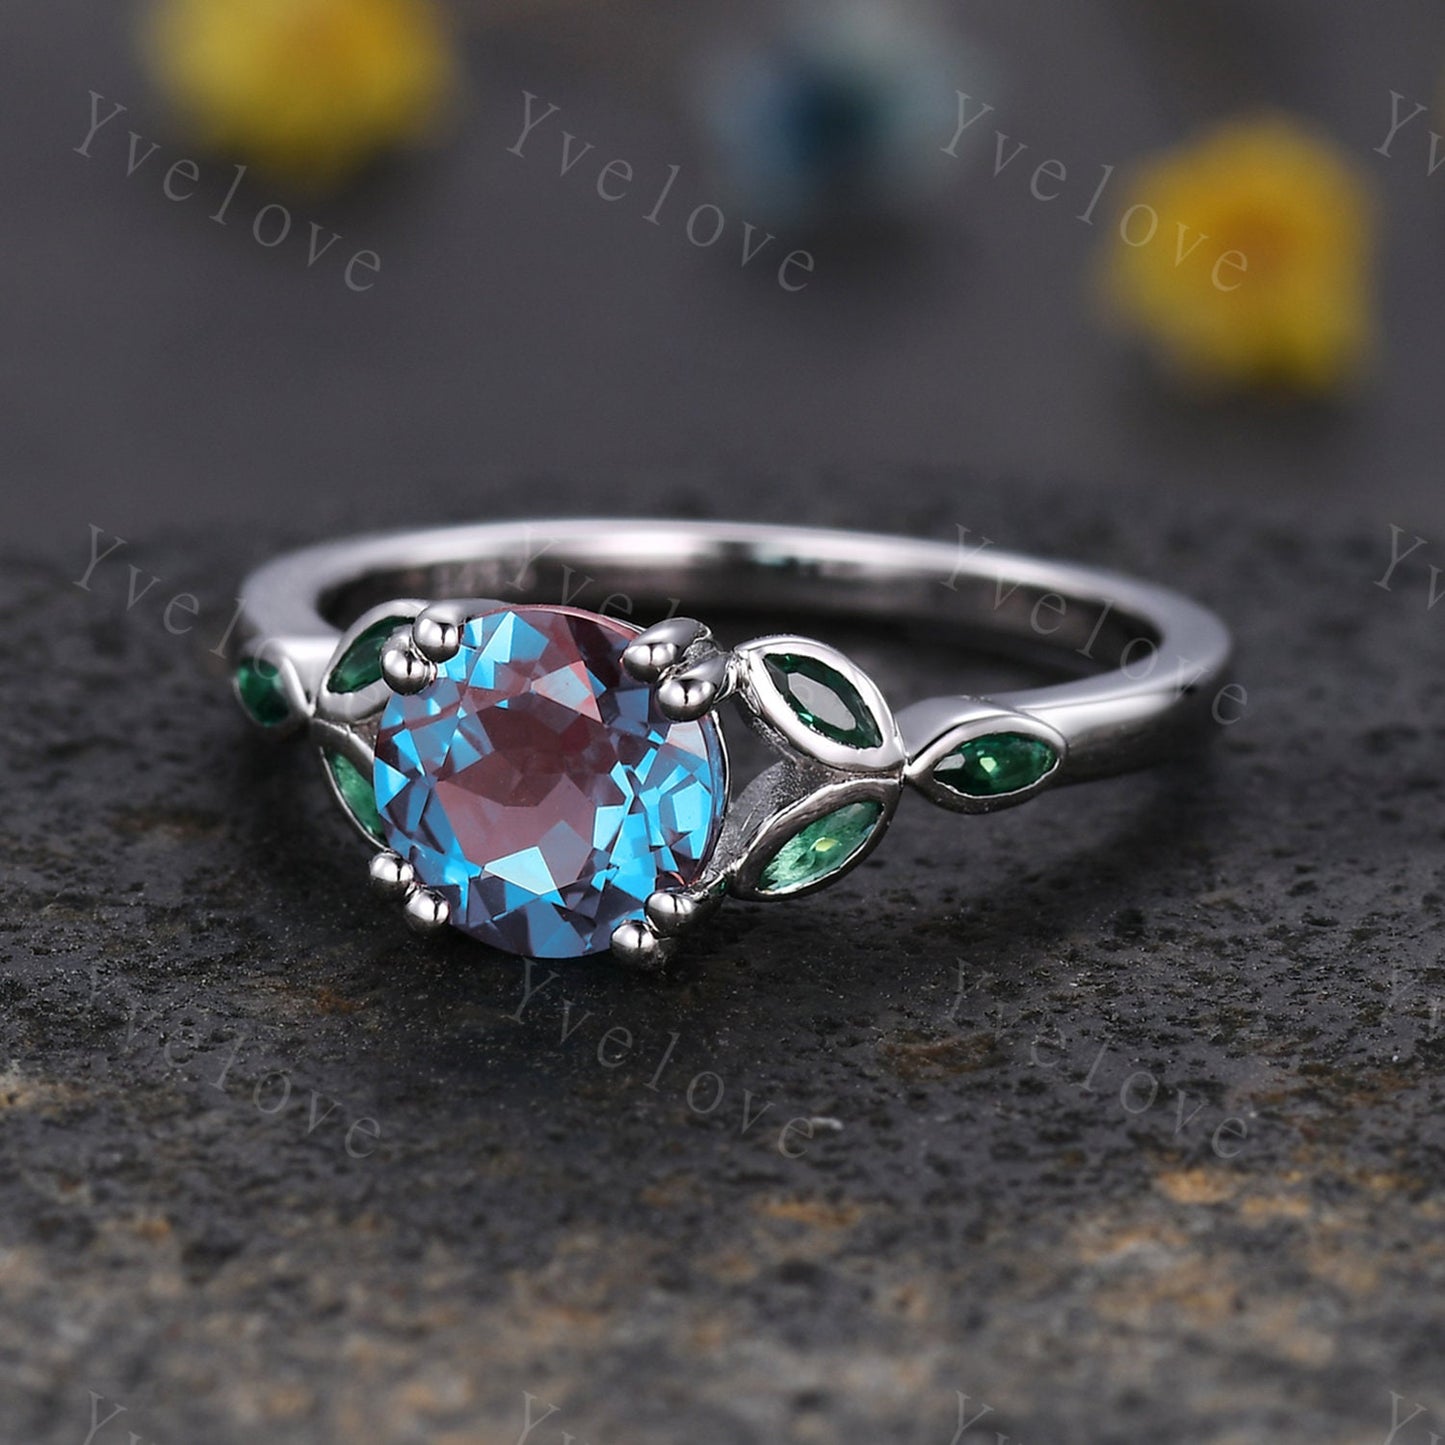 7mm round cut Alexandrite Ring,Vintage Engagement Ring,Color Changing Stone,June Birthstone Ring,Emerald Jewelry Promise Anniversary Ring